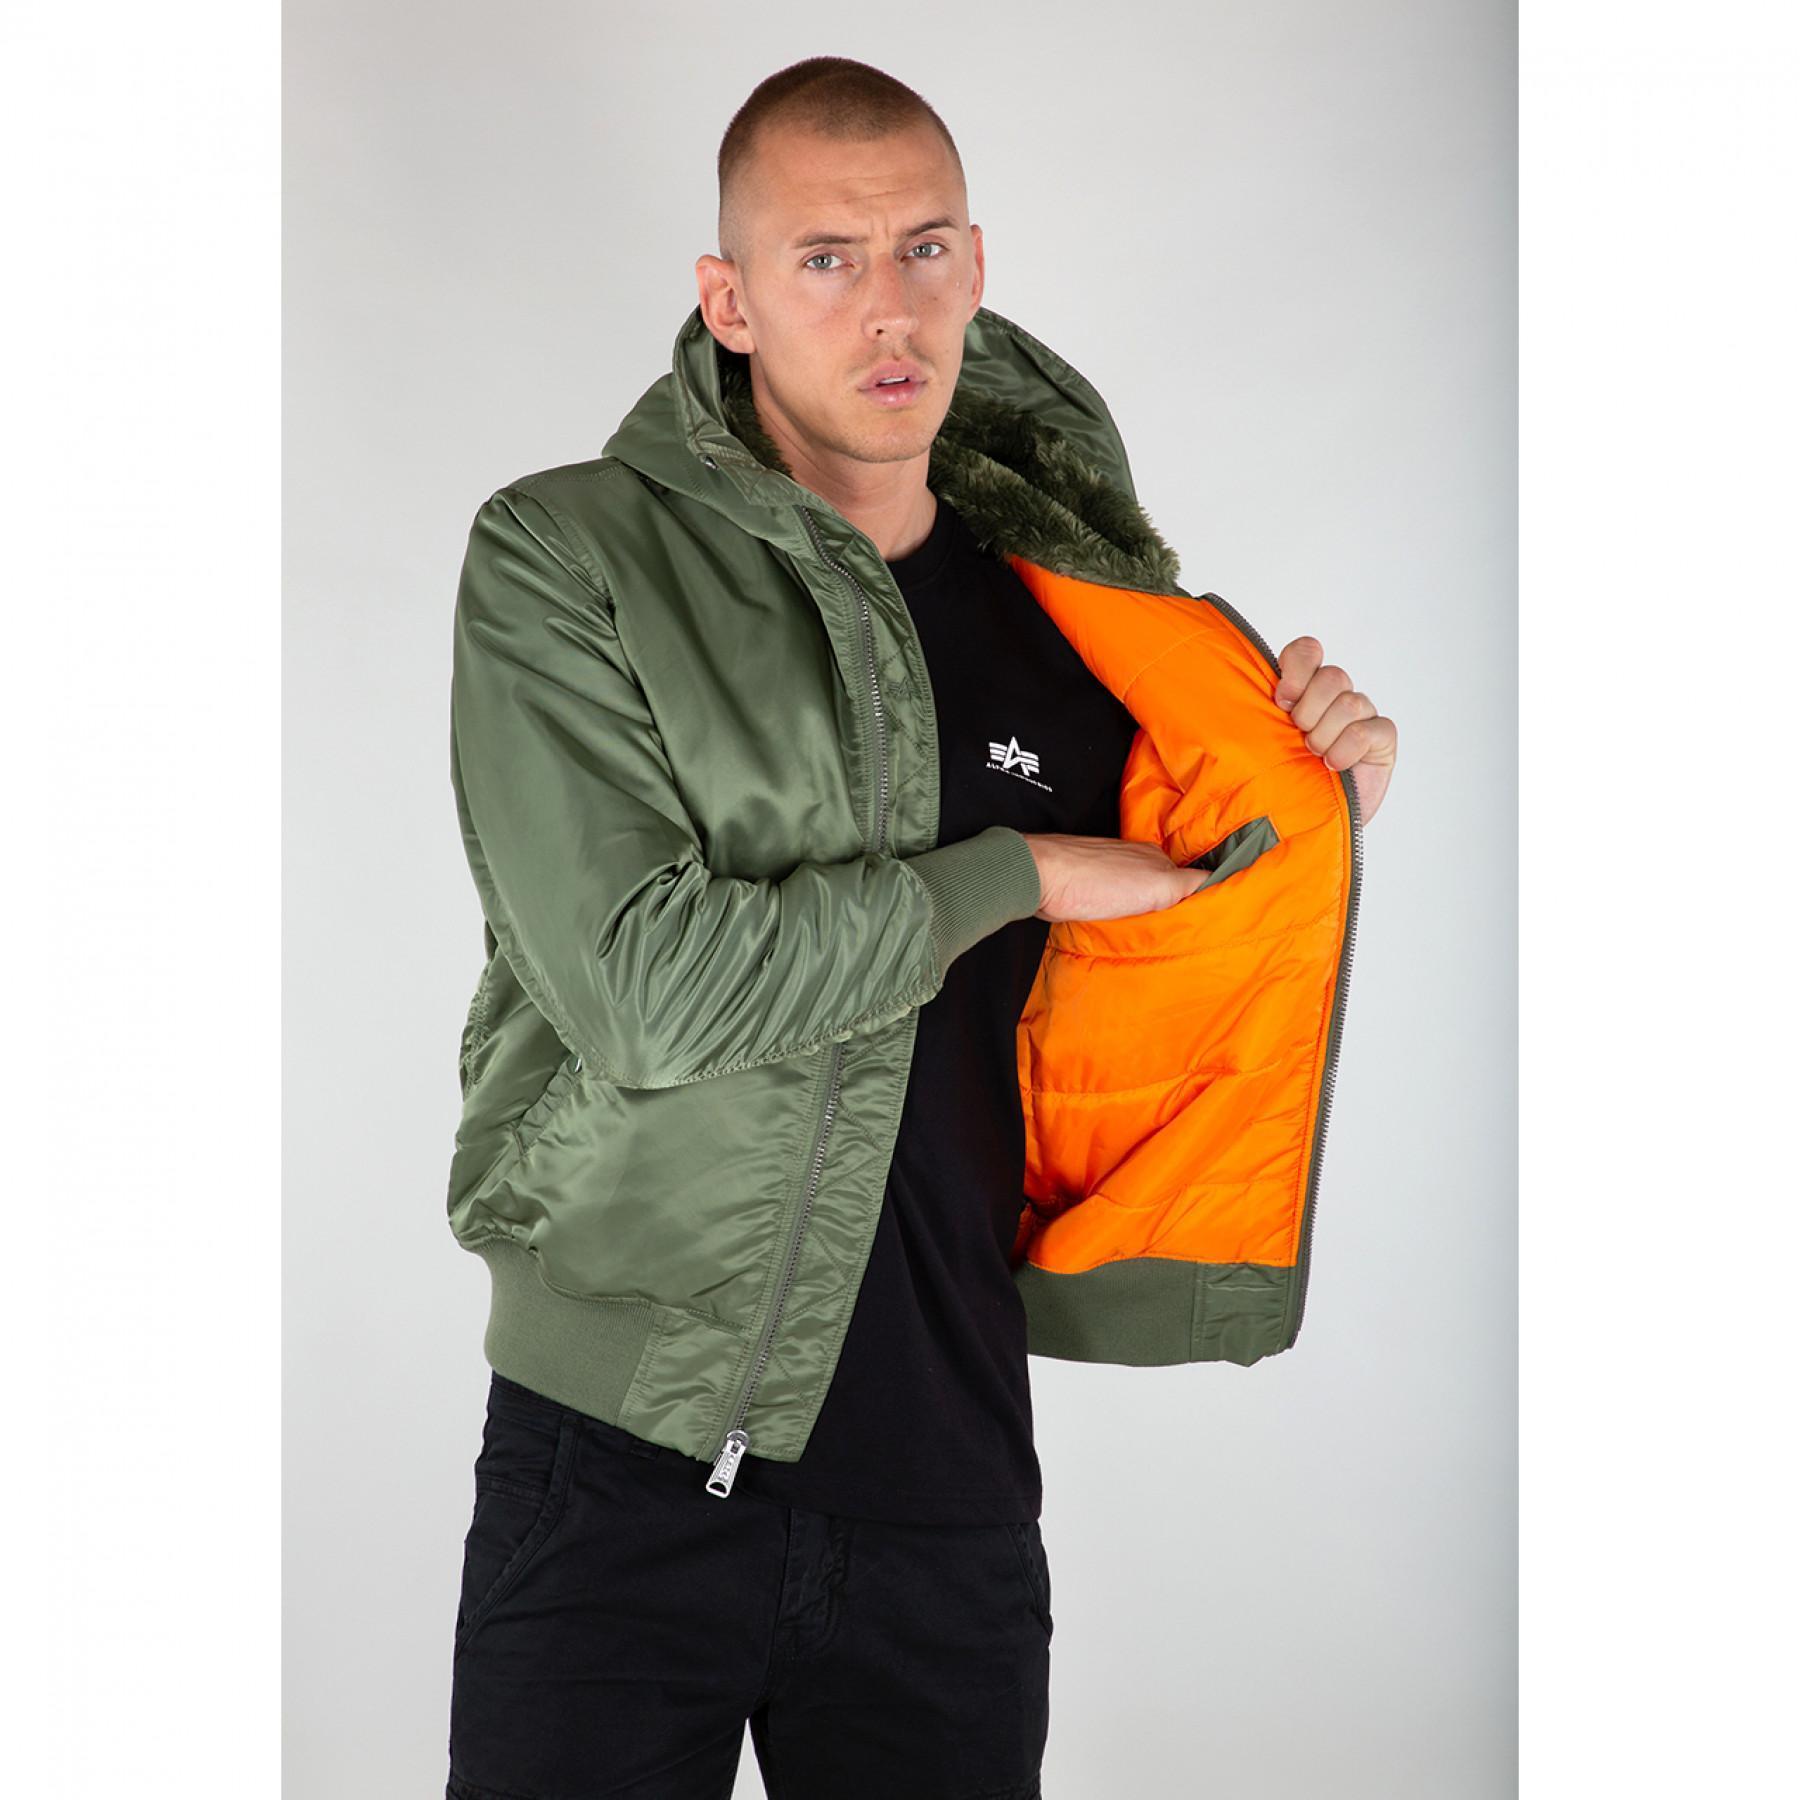 Hooded bomber Alpha Industries MA-1